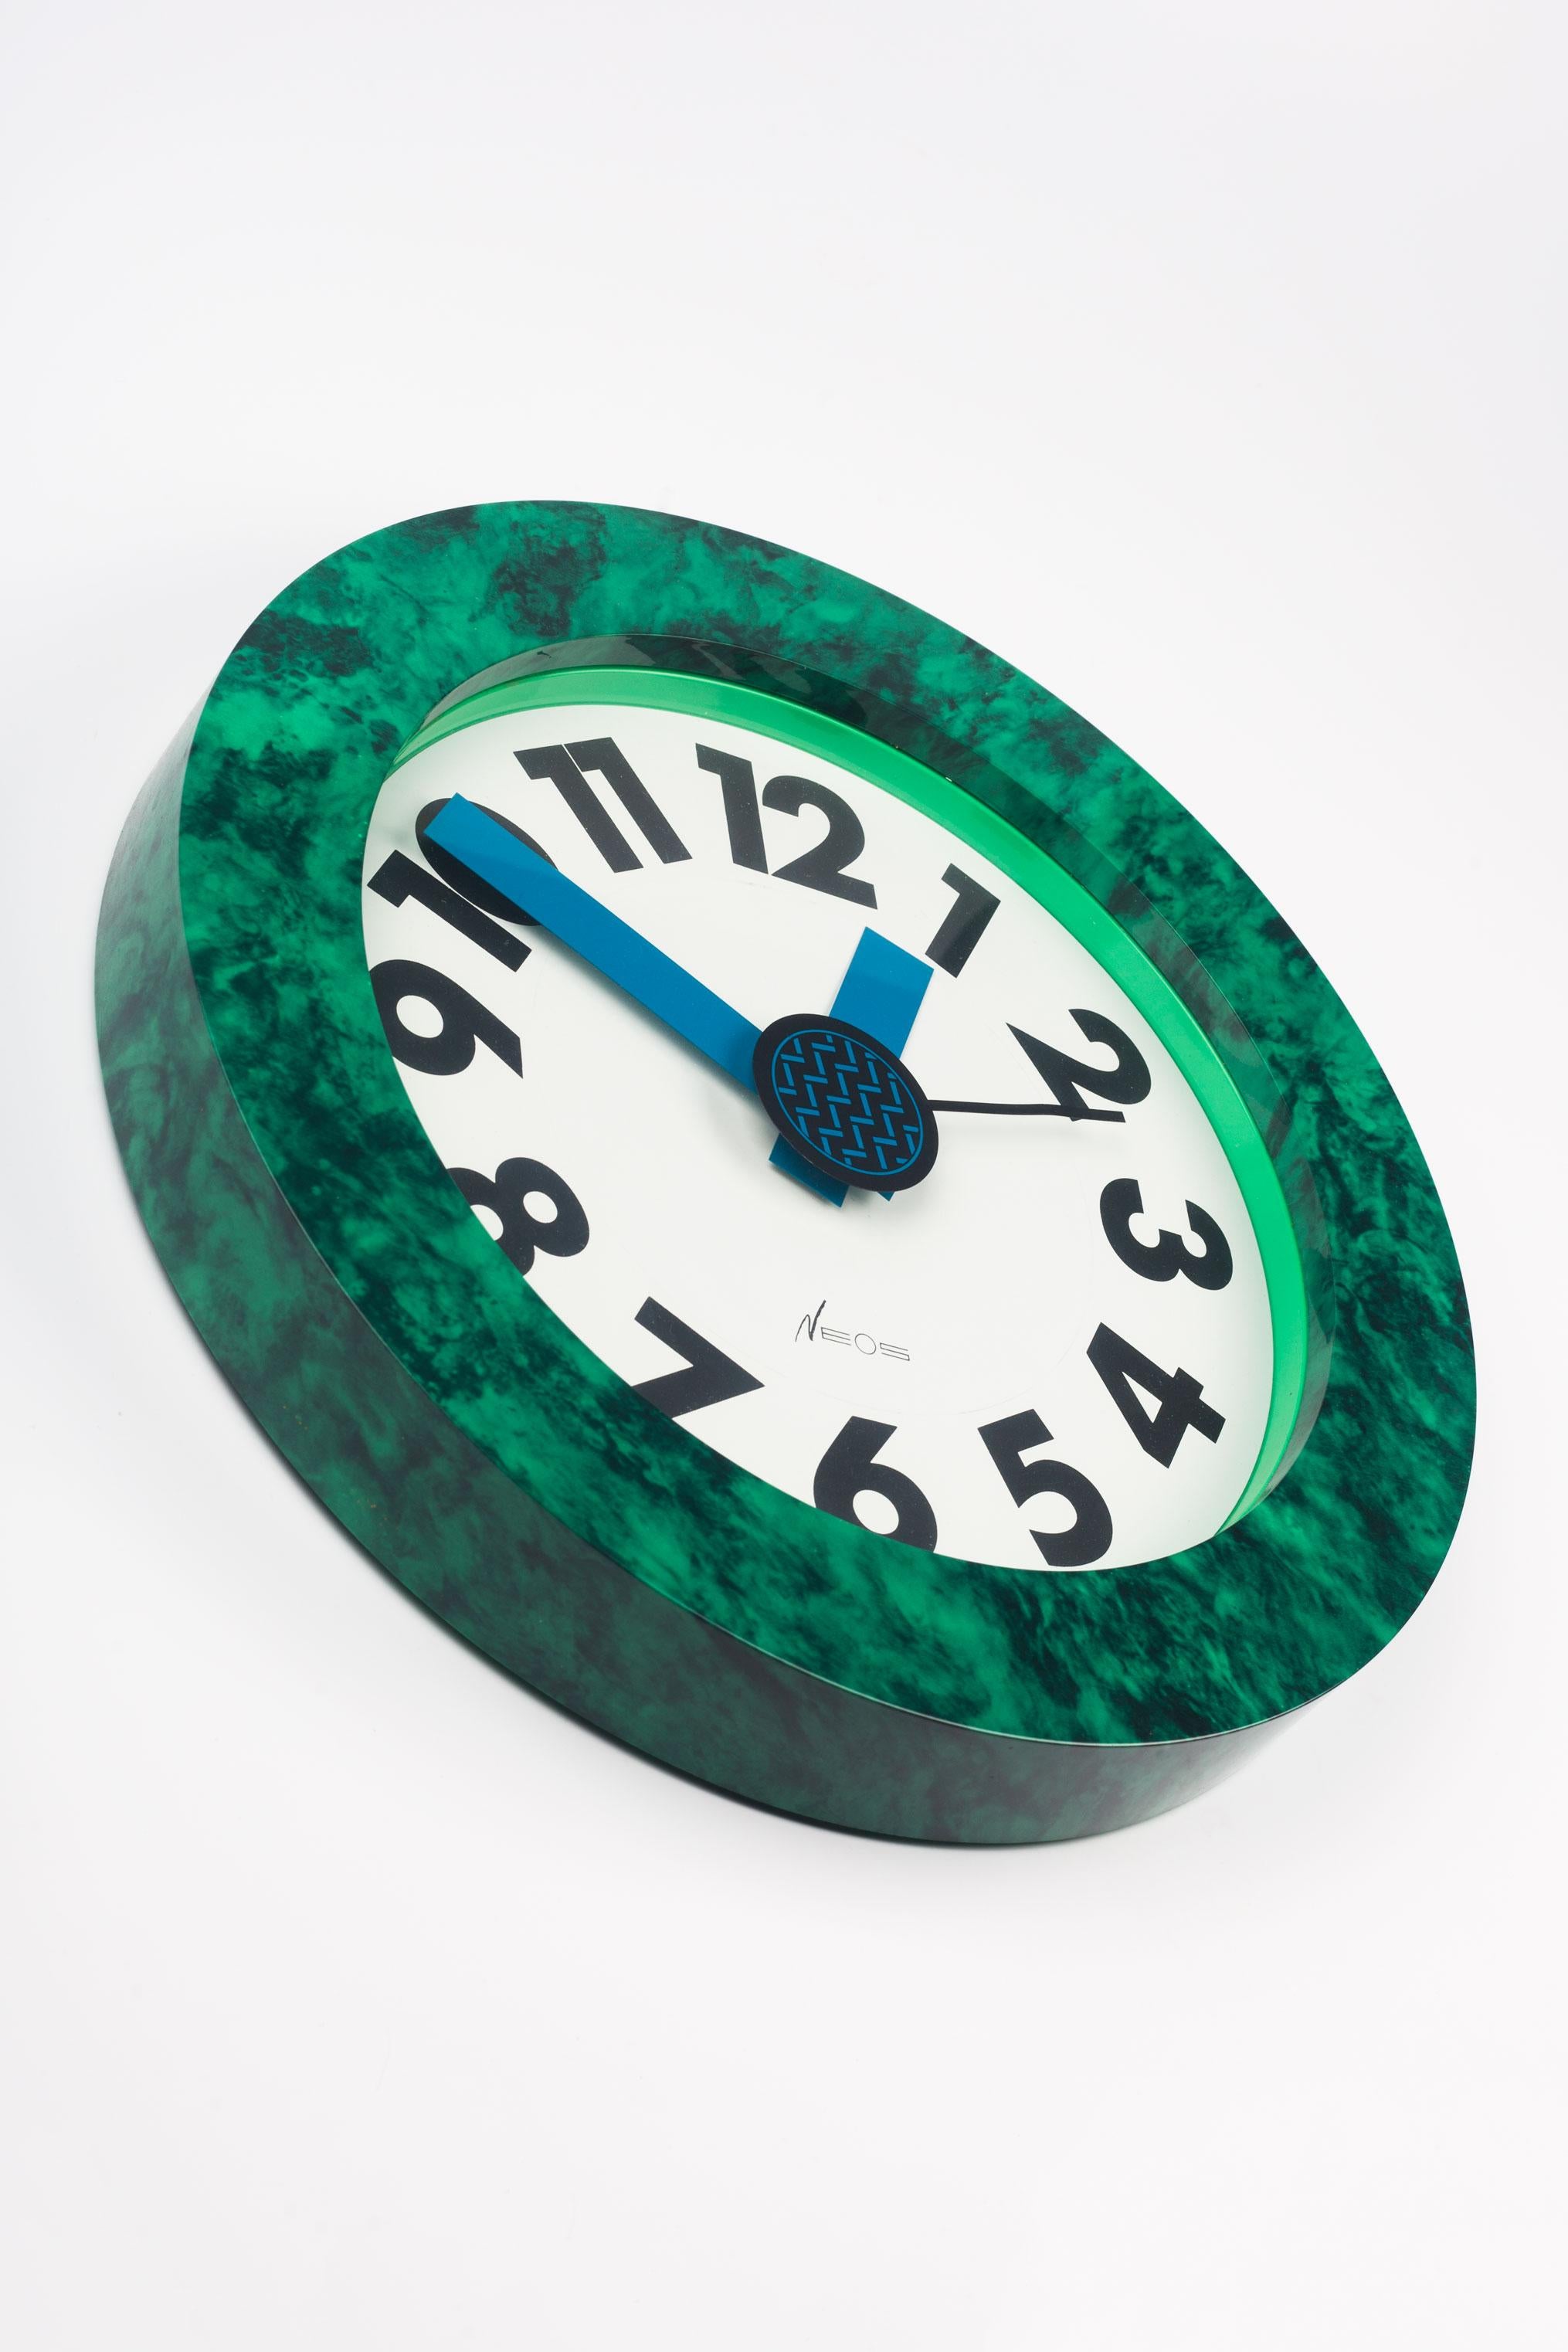 Postmodern wall clock designed by the Memphis Group founding members and couple, George Sowden and Nathalie du Pasquier. Marbled green and black pattern frame with bold black numerals behind thick, crisp, blue hour and minute hands. The central